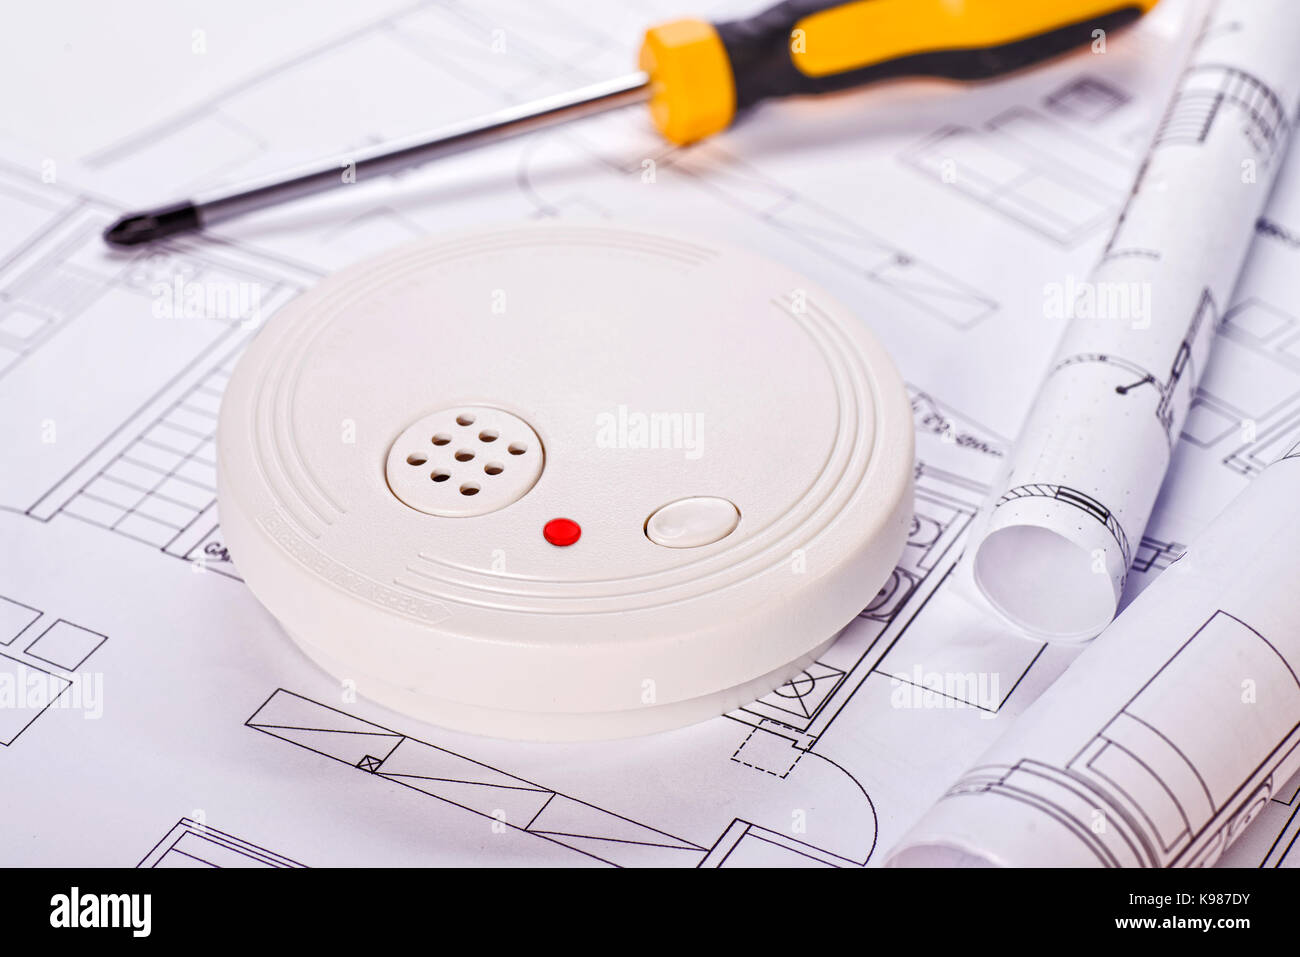 Smoke detector lying on blueprints with screwdriver in the background Stock Photo